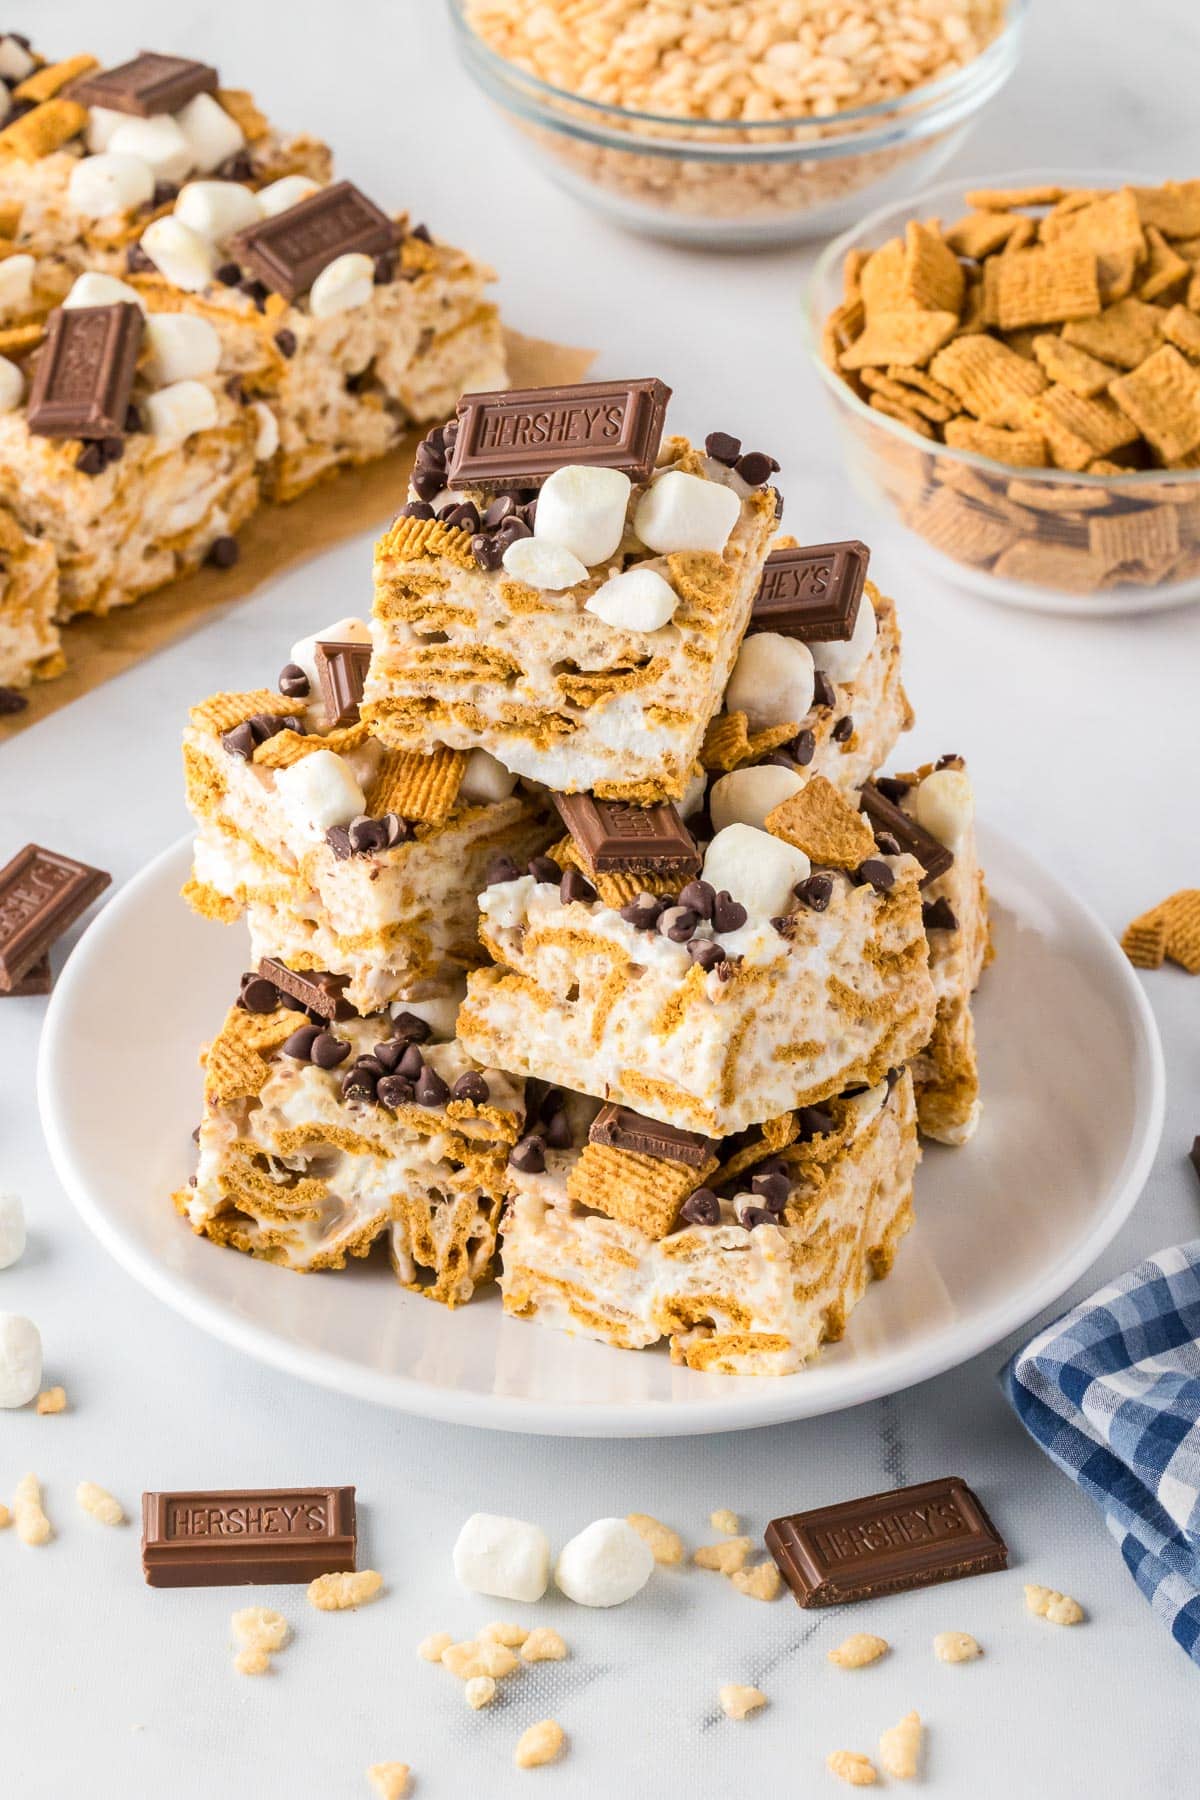 A plate of s'mores Rice Krispie treats bars stacked three high with more bars and bowls of cereal in the background.